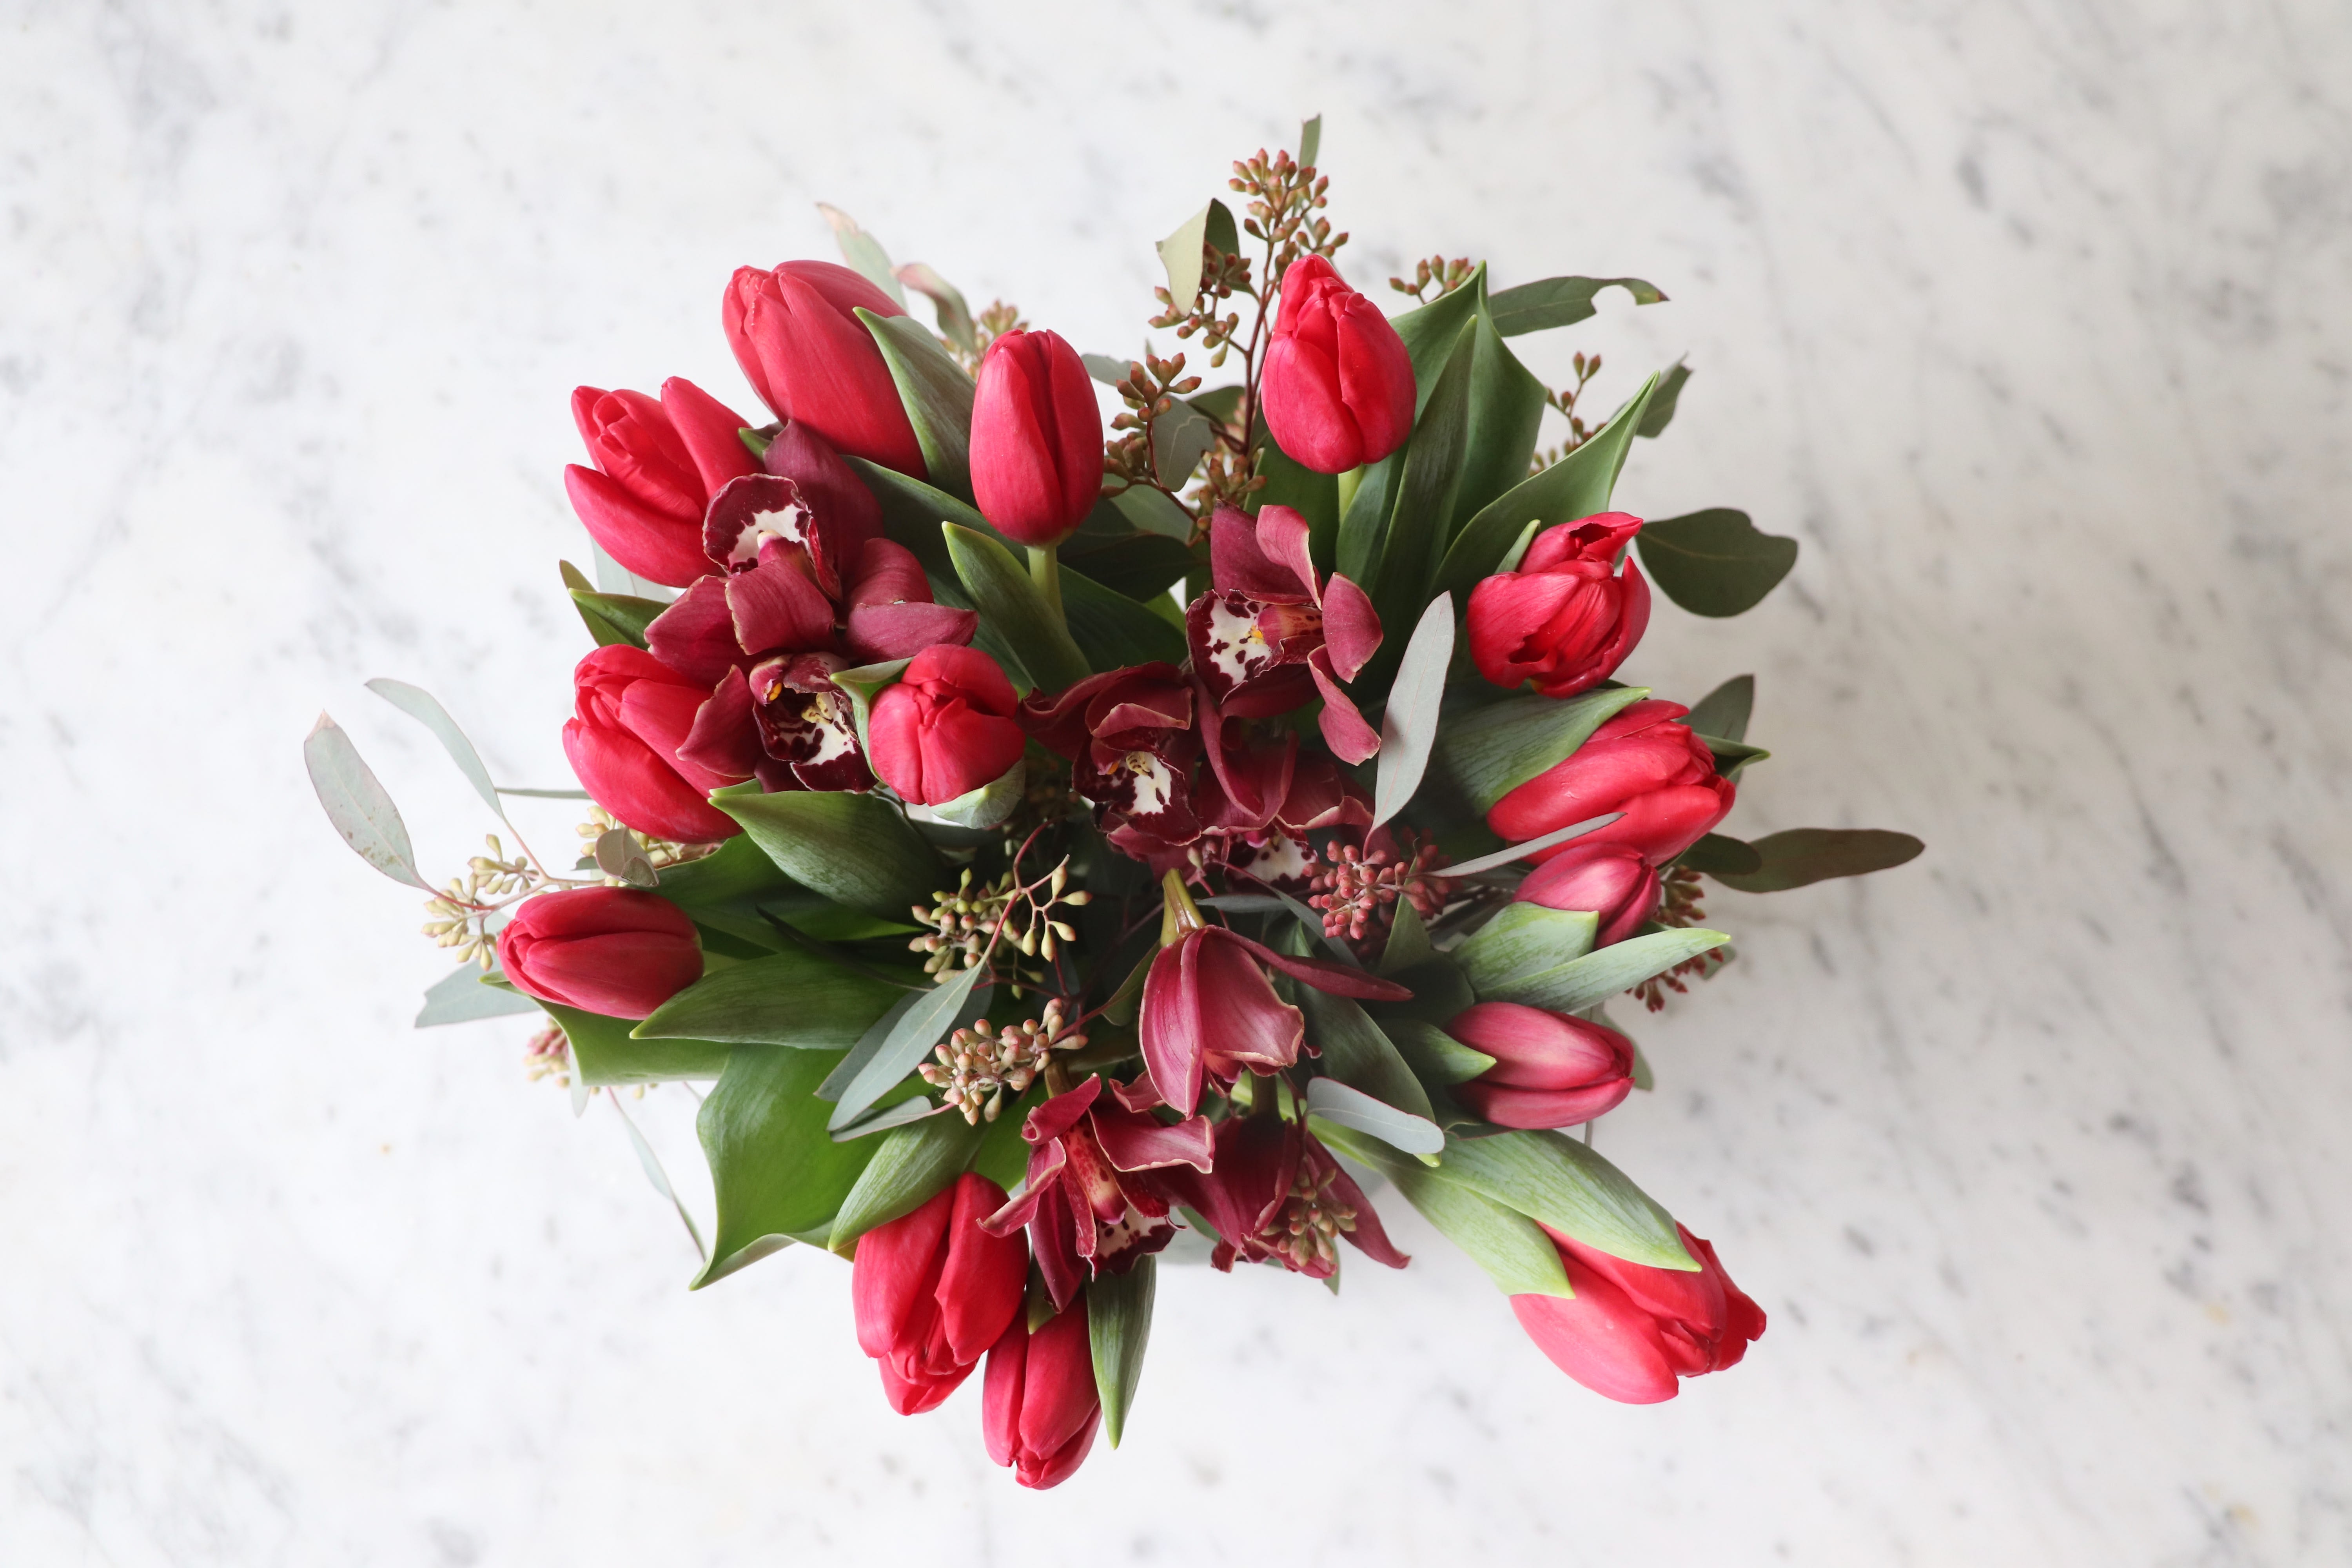 My Valentine - An organic explosion of blooming tulips elevated with cinnamon-hued cymbidium orchid and seeded eucalyptus in a clear vase.